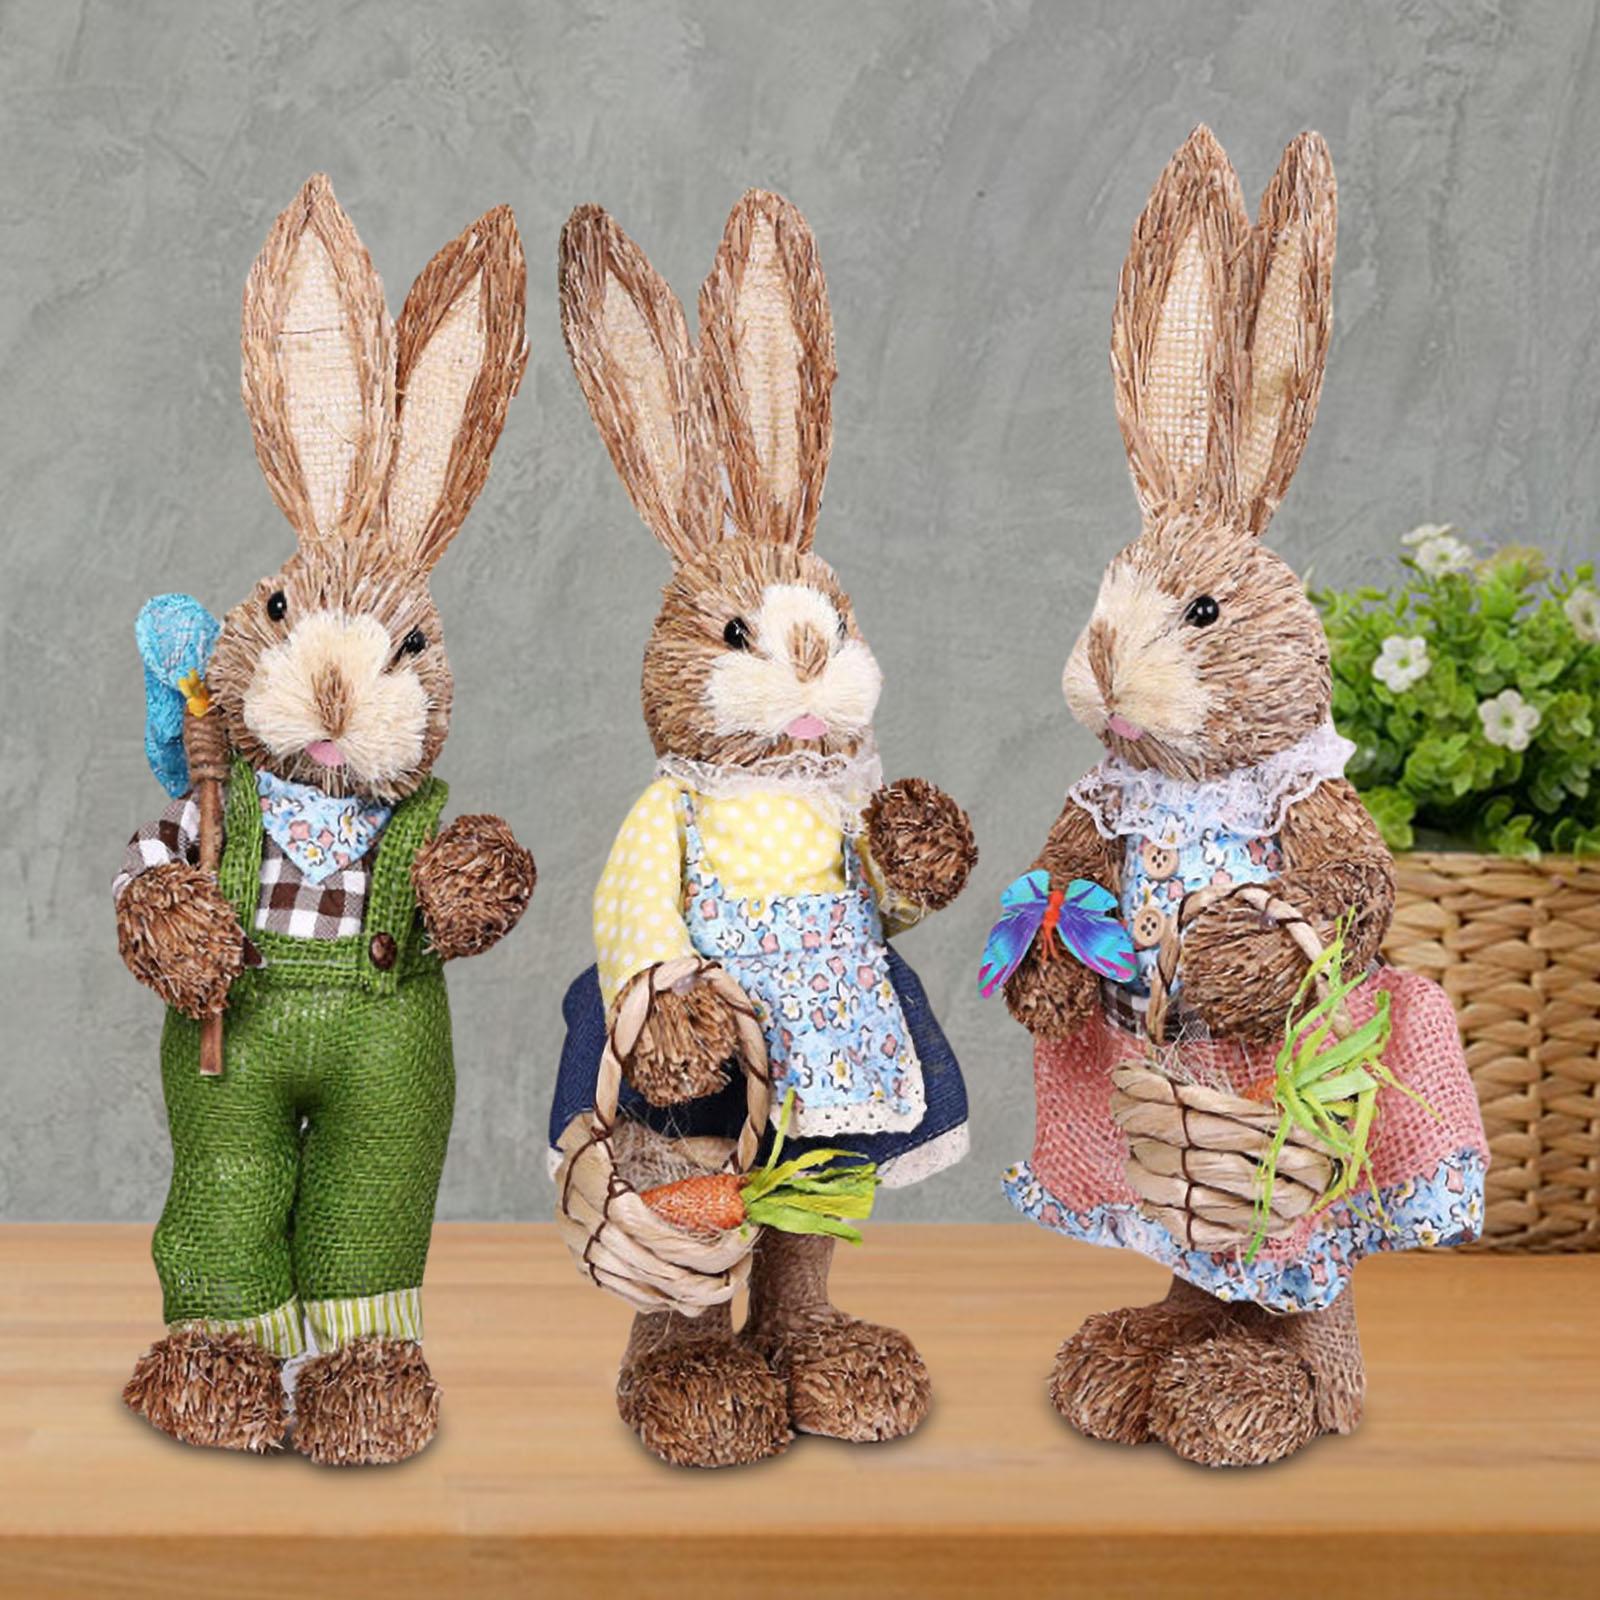 1 Set Straw Bunny Ornament w/ Clothes Easter for Christmas Garden 3 Pieces